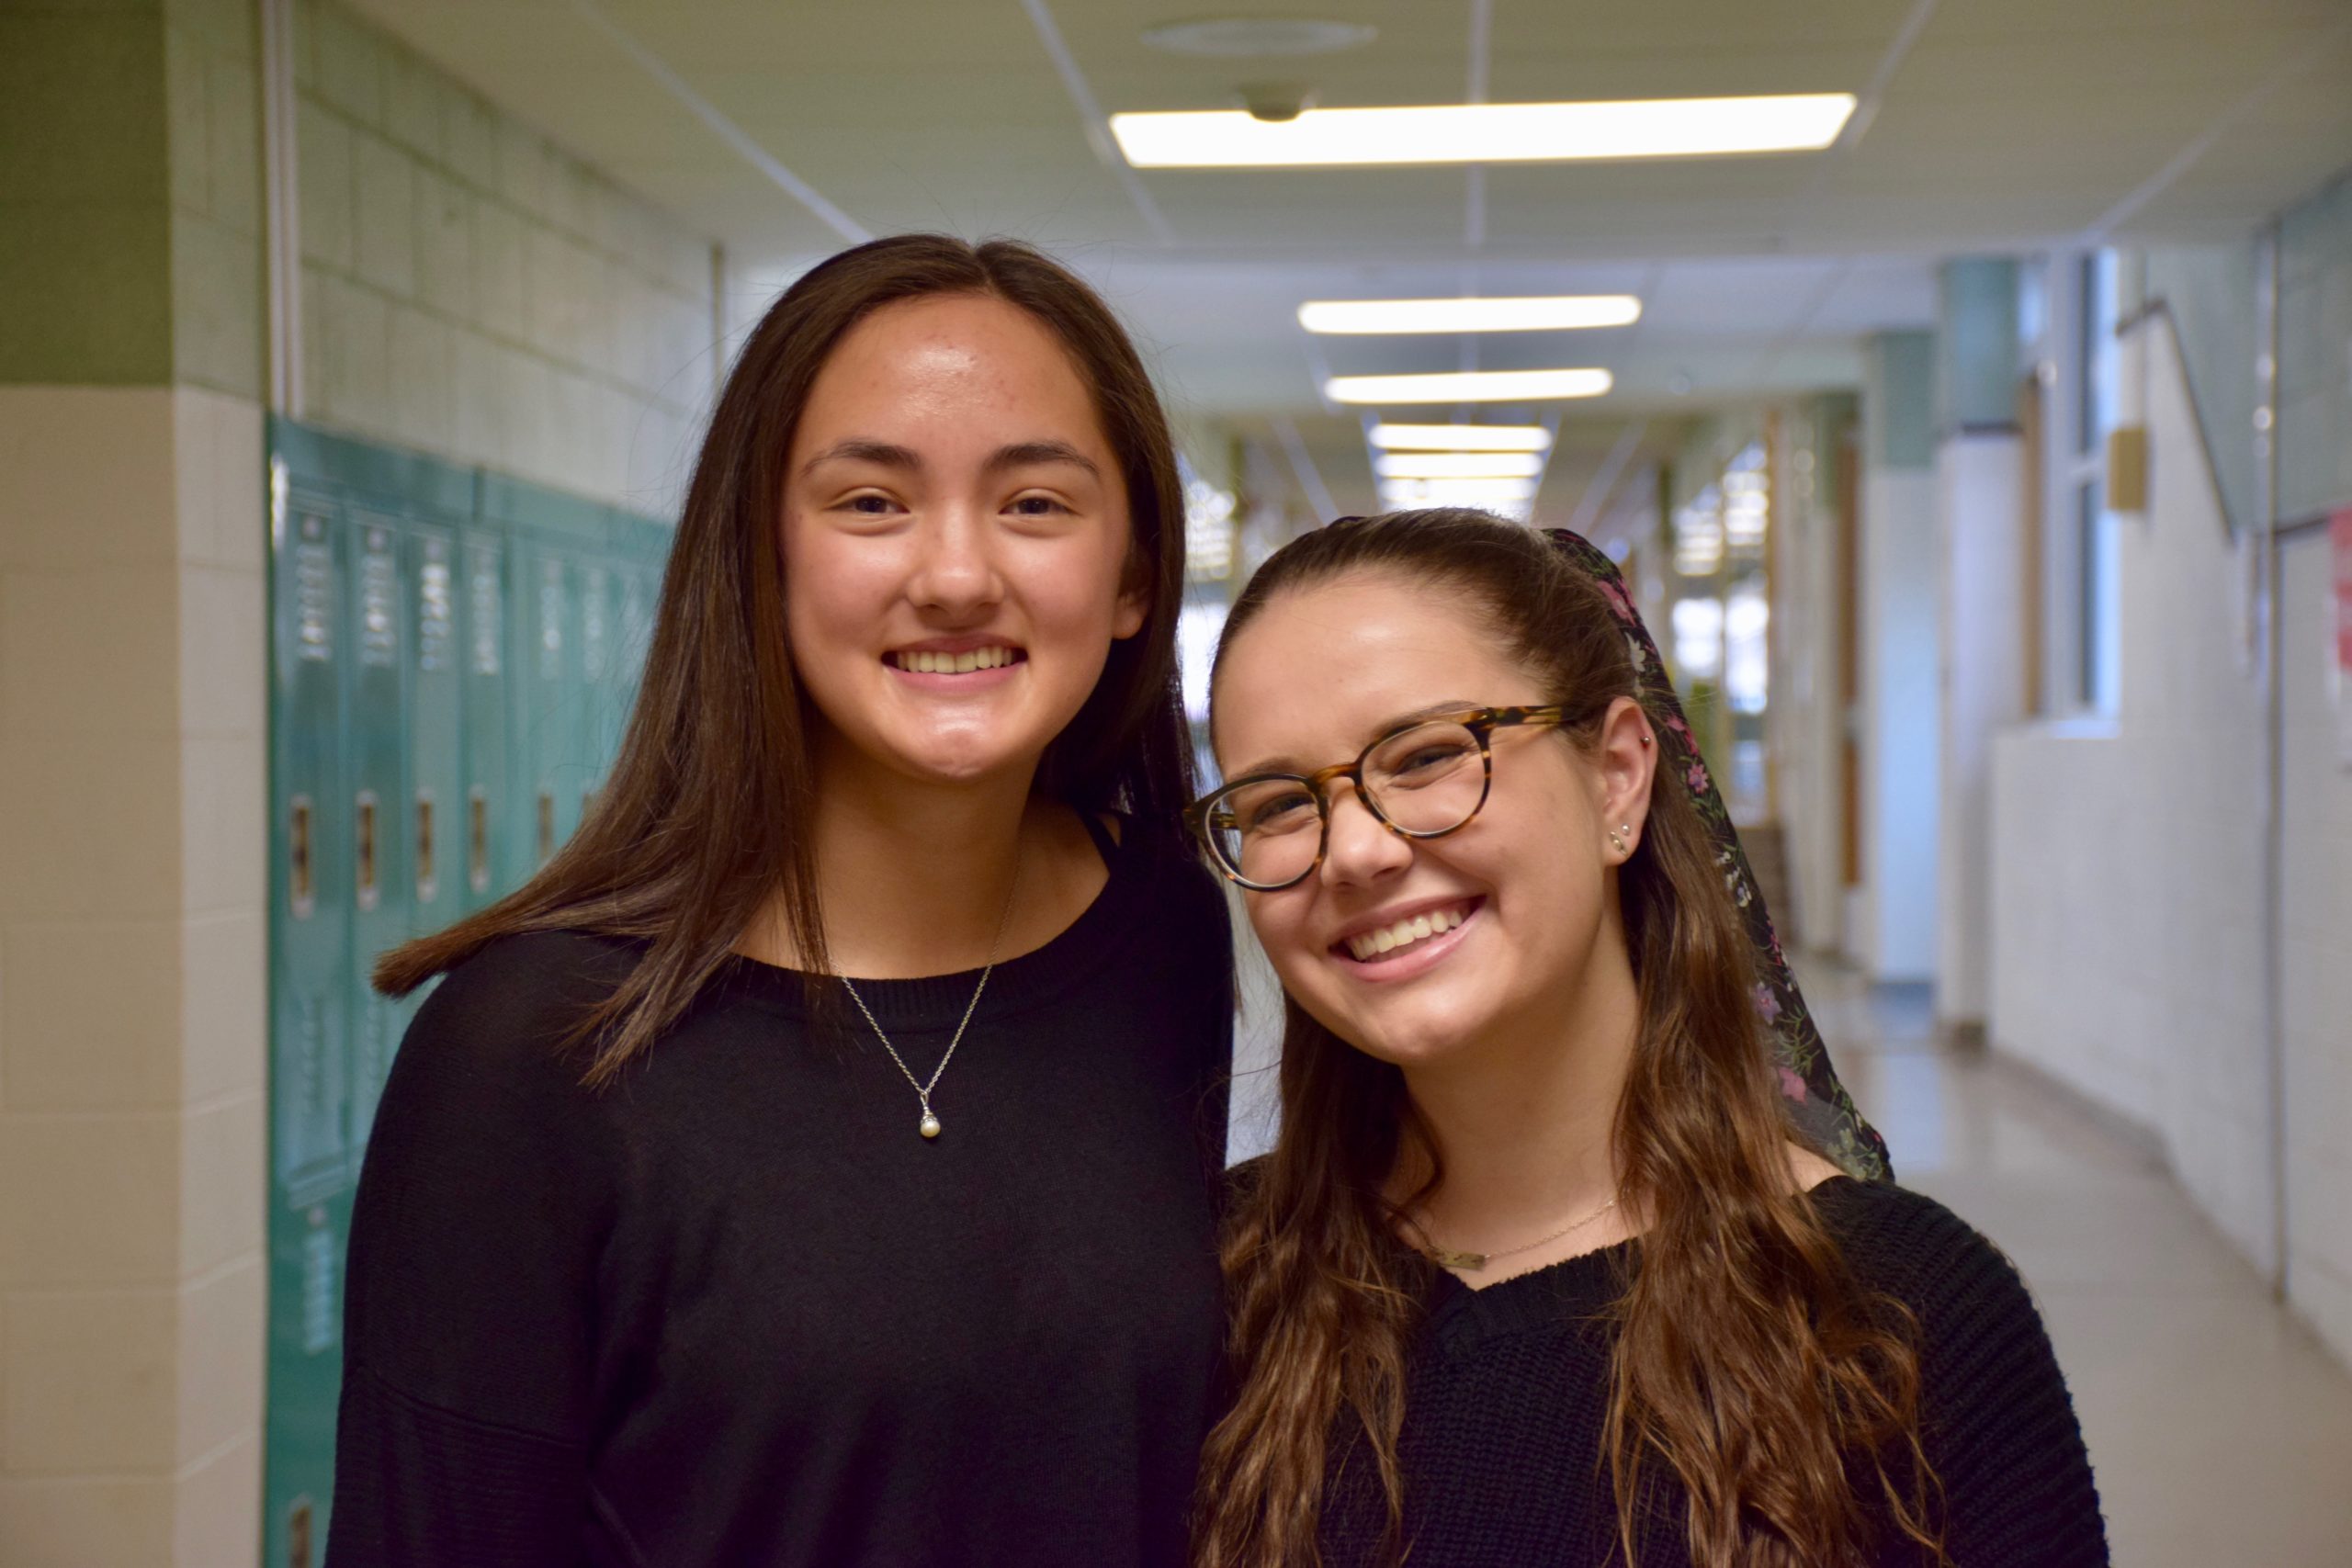 Westhampton Beach High School has named Kathleen Kelly, left, and Kay Horak as the Class of 2020 salutatorian and valedictorian, respectively.